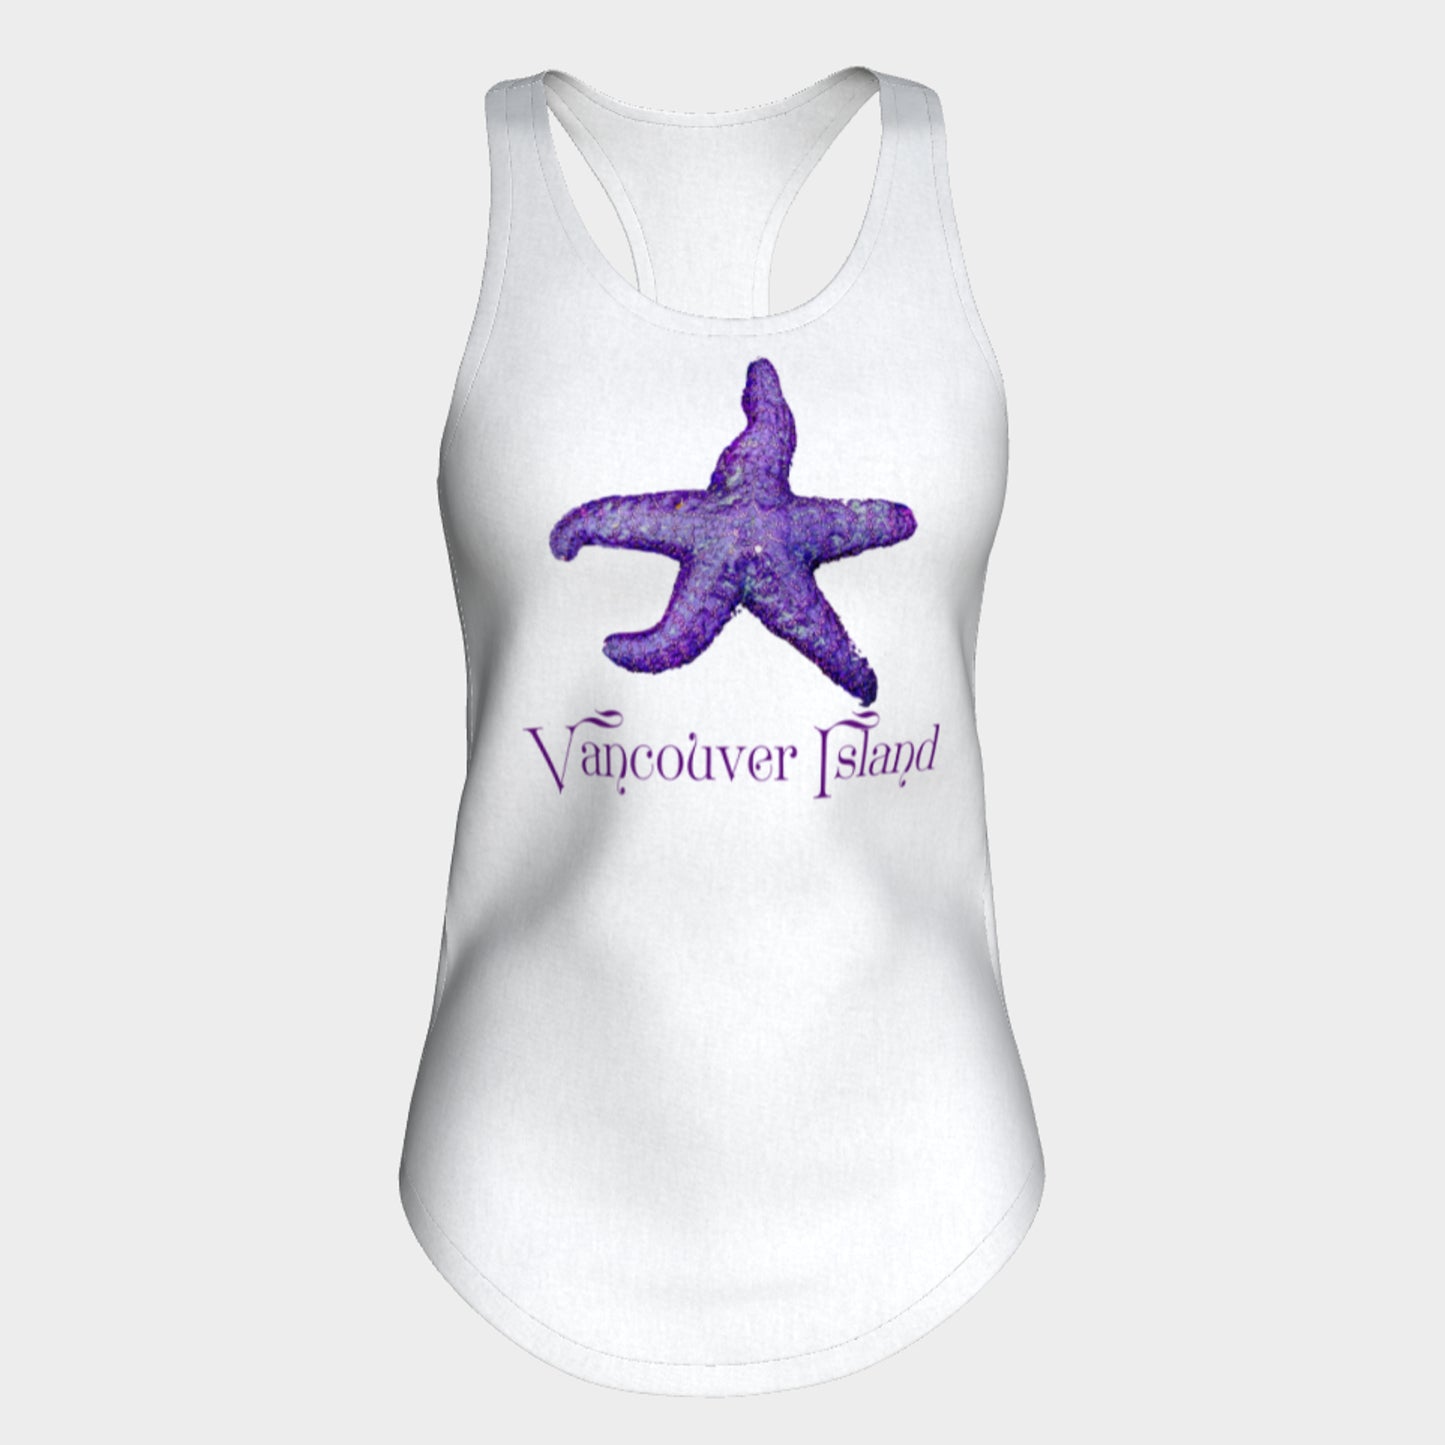 Starfish Vancouver Island Racerback Tank Top  Excellent choice for the summer or for working out.   Made from 60% spun cotton and 40% poly for a mix of comfort and performance, you get it all (including my photography and digital art) with this custom printed racerback tank top.   Van Isle Goddess Next Level racerback tank top will quickly become you go-to tank top because of the super comfy fit!